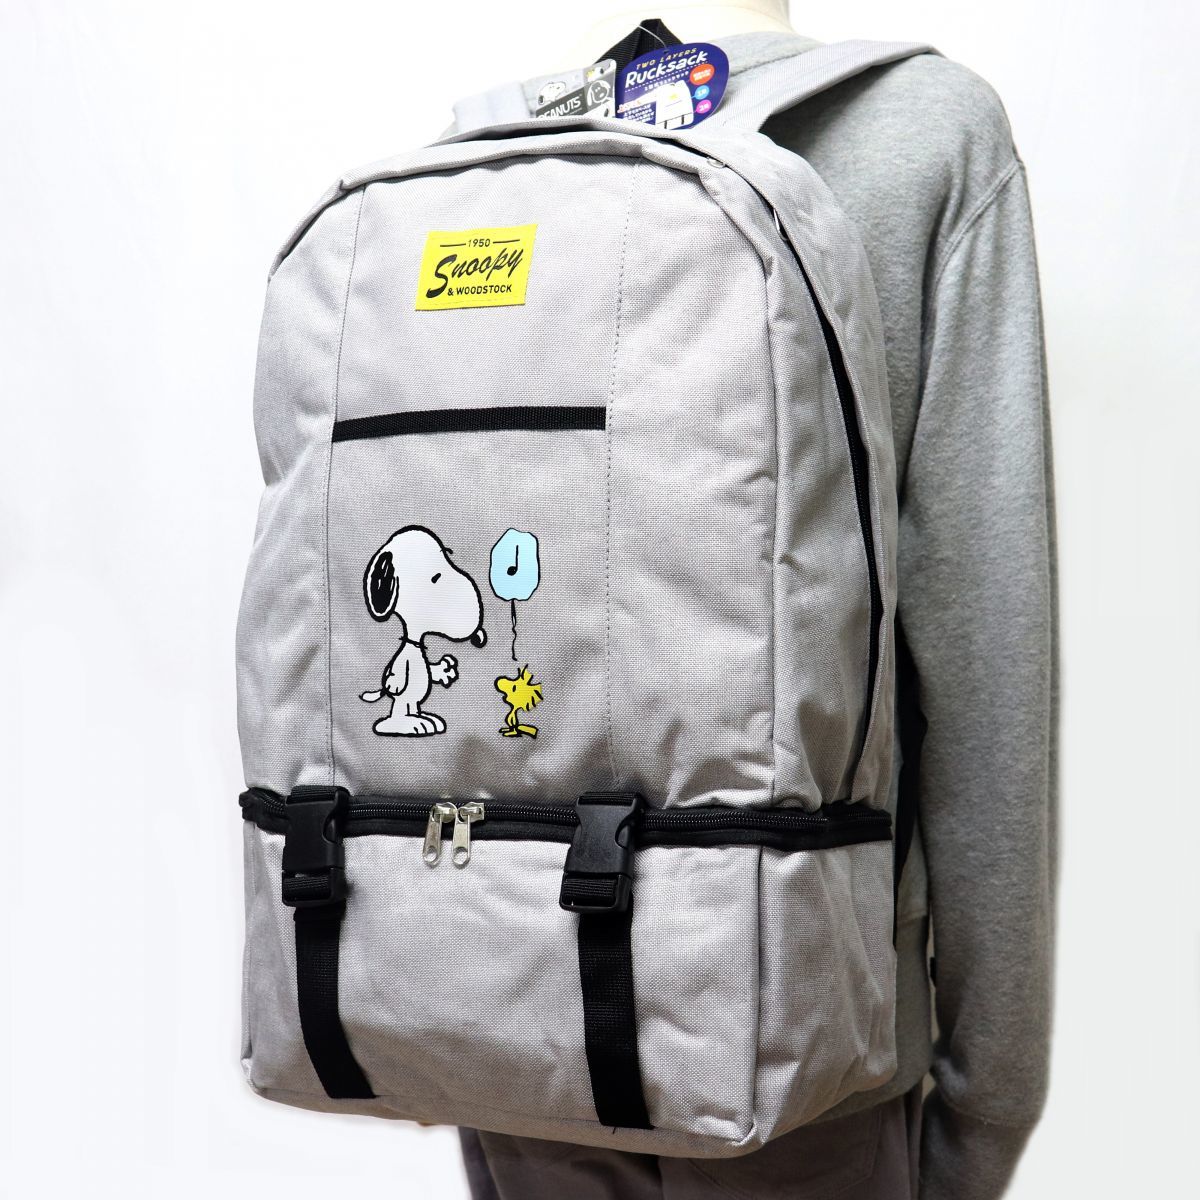 * Snoopy Peanuts SNOOPY PEANUTS new goods 2 layer type rucksack Day Pack backpack bag ash [SNOOPYA-LGY1N] one six *QWER*